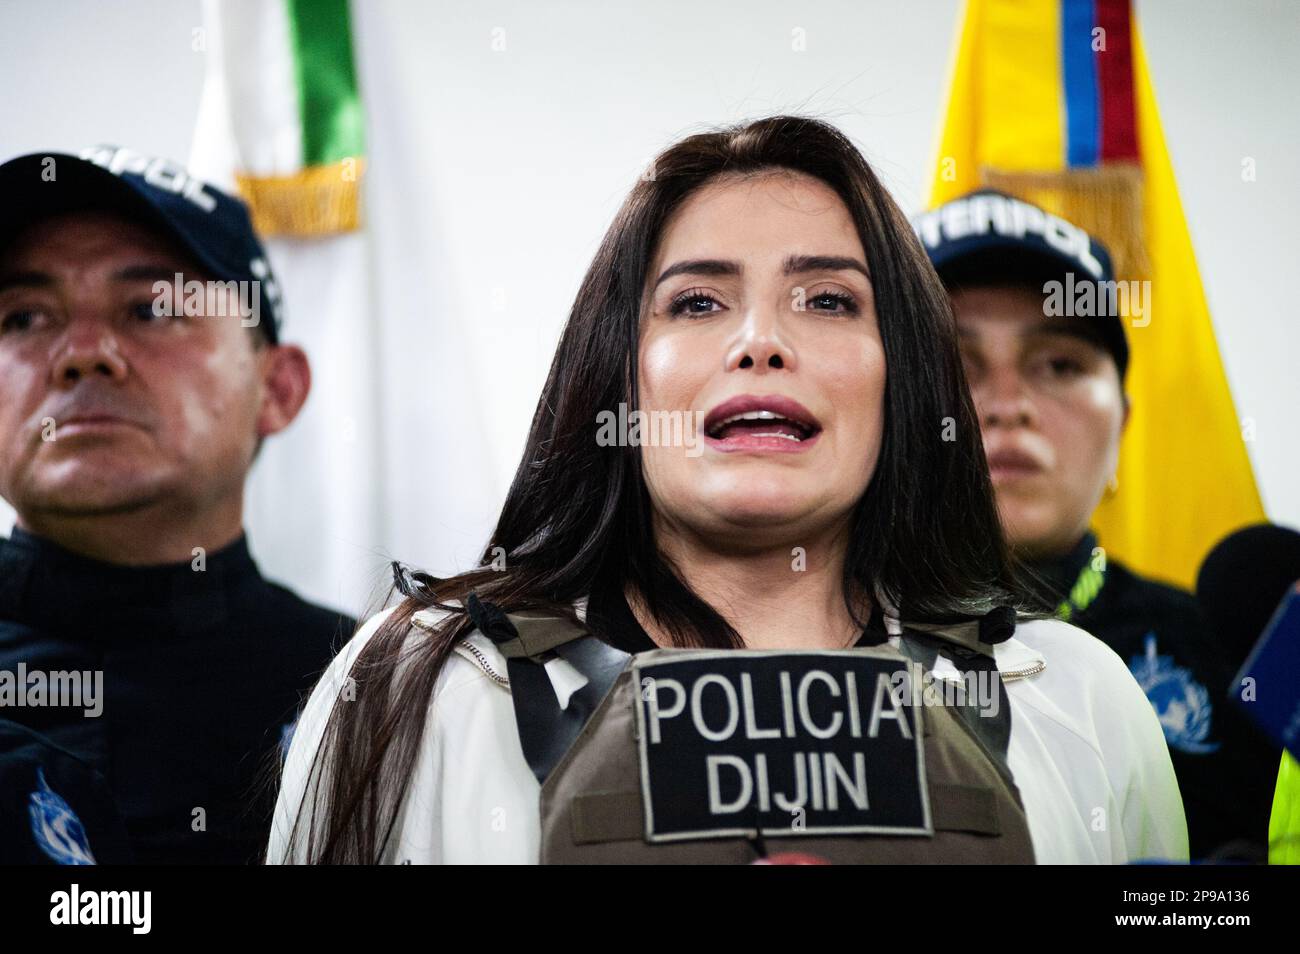 Aida Merlano, former Colombian senator convicted of vote buying and fleeing from justice attends the identification review at the Criminal Investigati Stock Photo